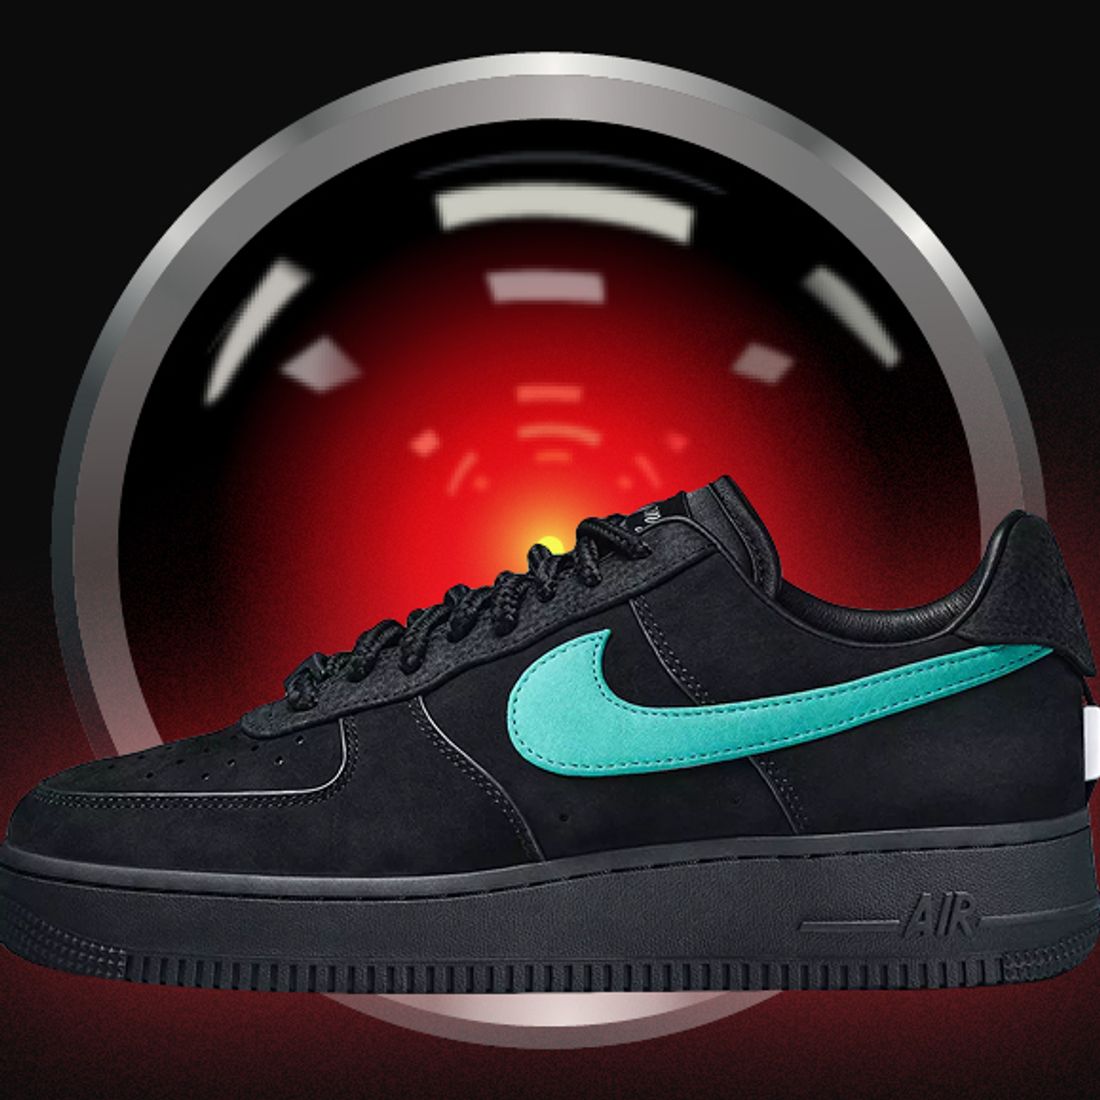 Tiffany & Co. x Nike Launches Exclusive Air Force 1 Low Sneakers